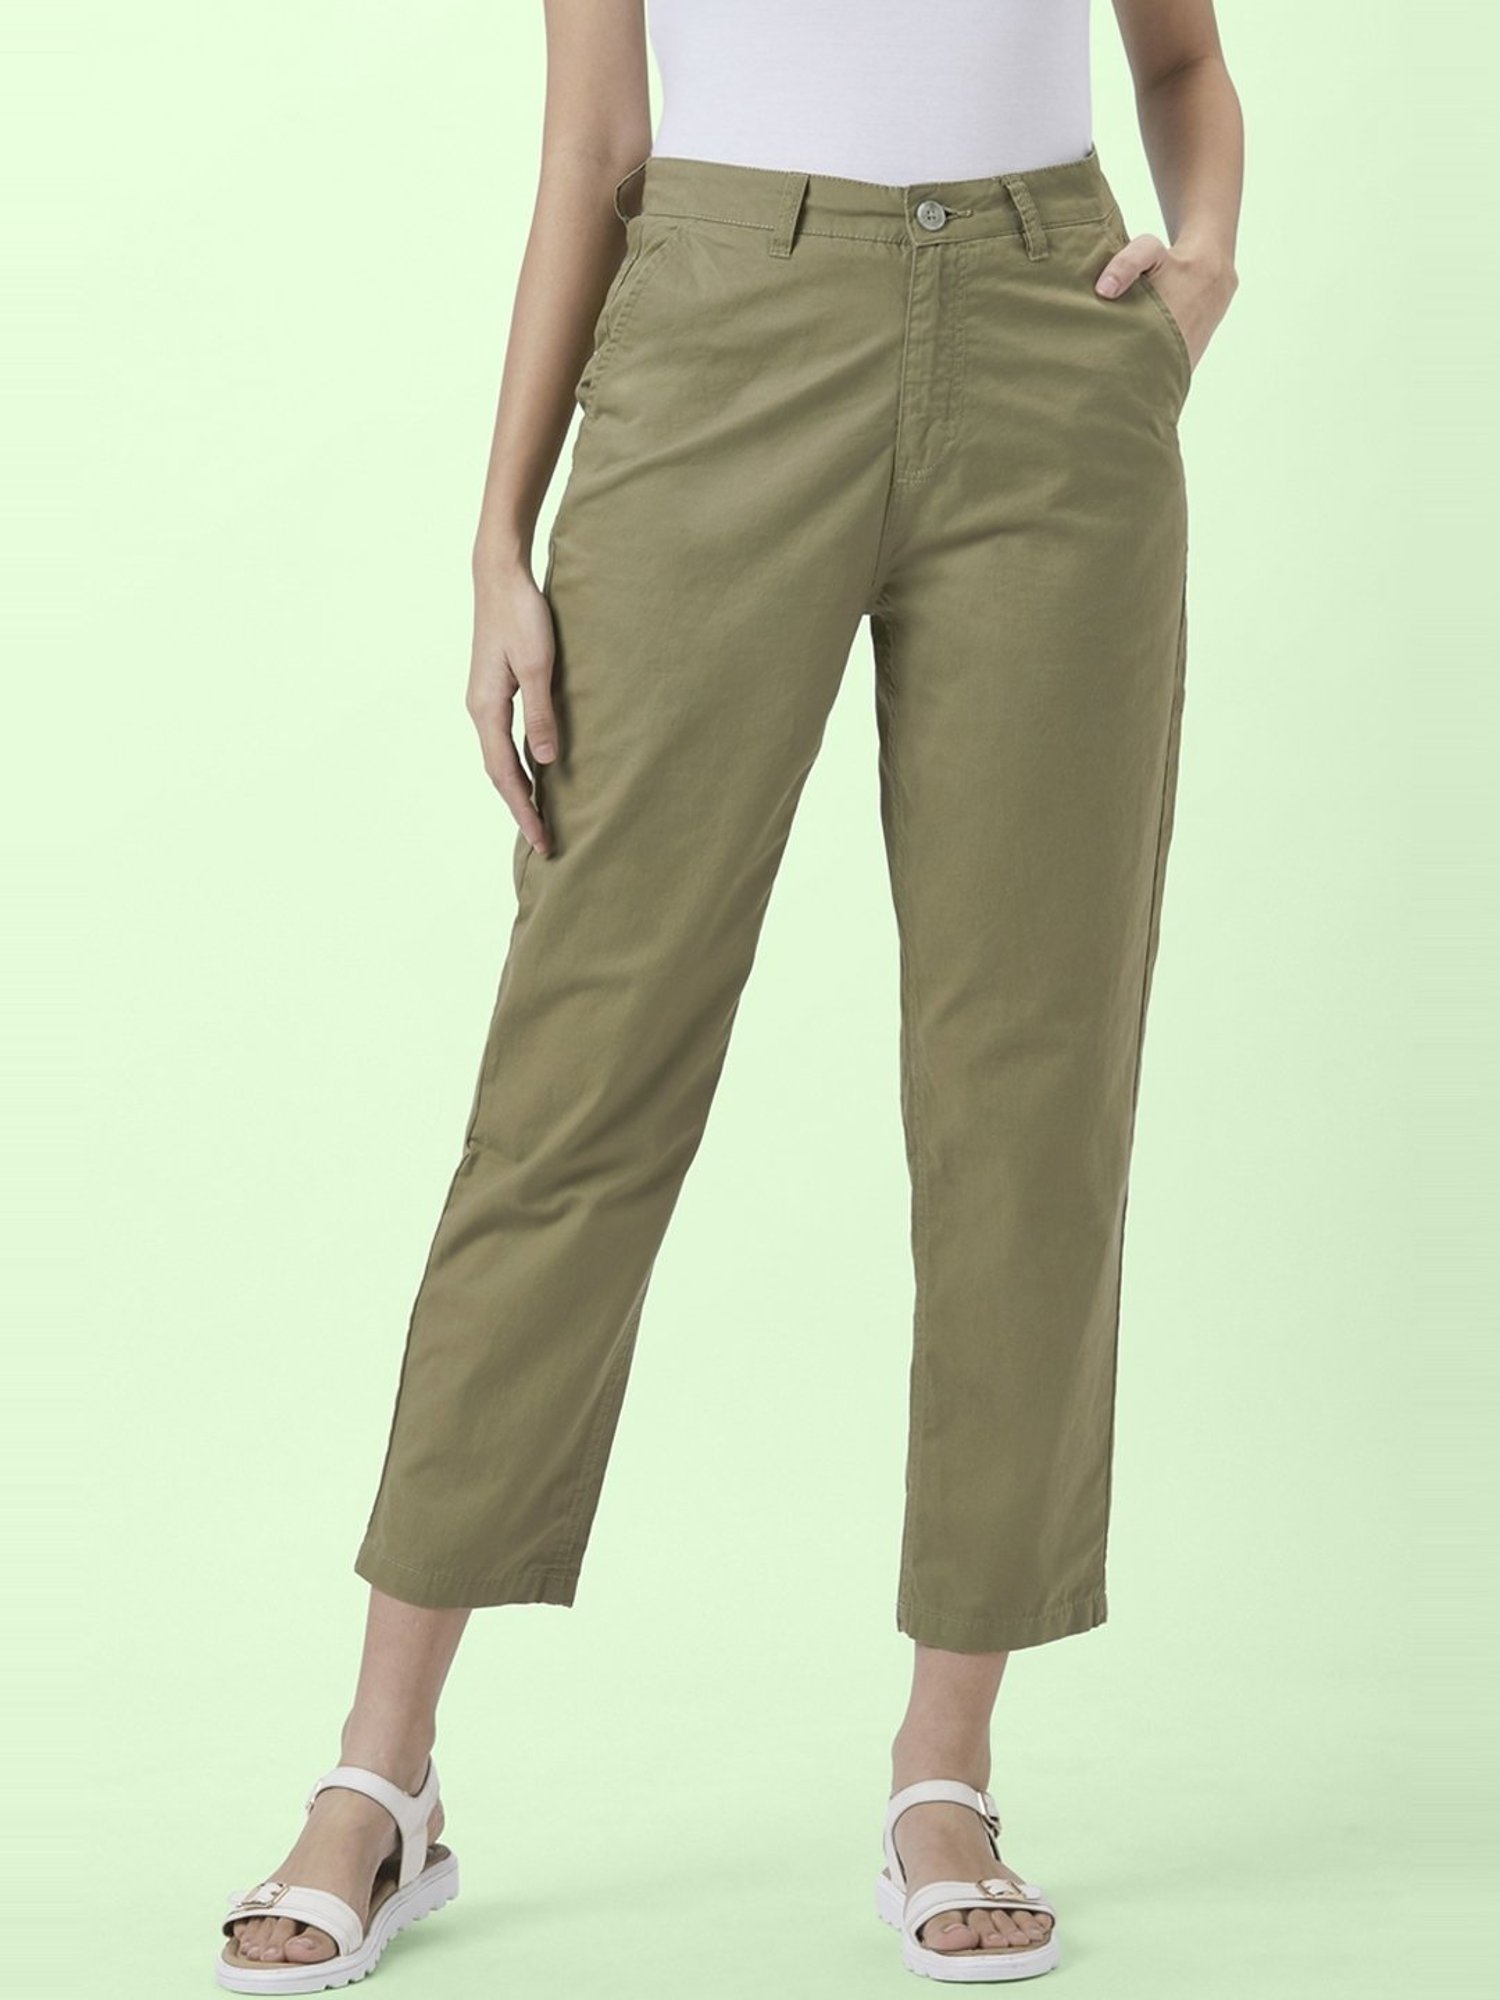 Buy Honey By Pantaloons Women Olive Green Regular Fit Solid Regular Trousers   Trousers for Women 8929457  Myntra